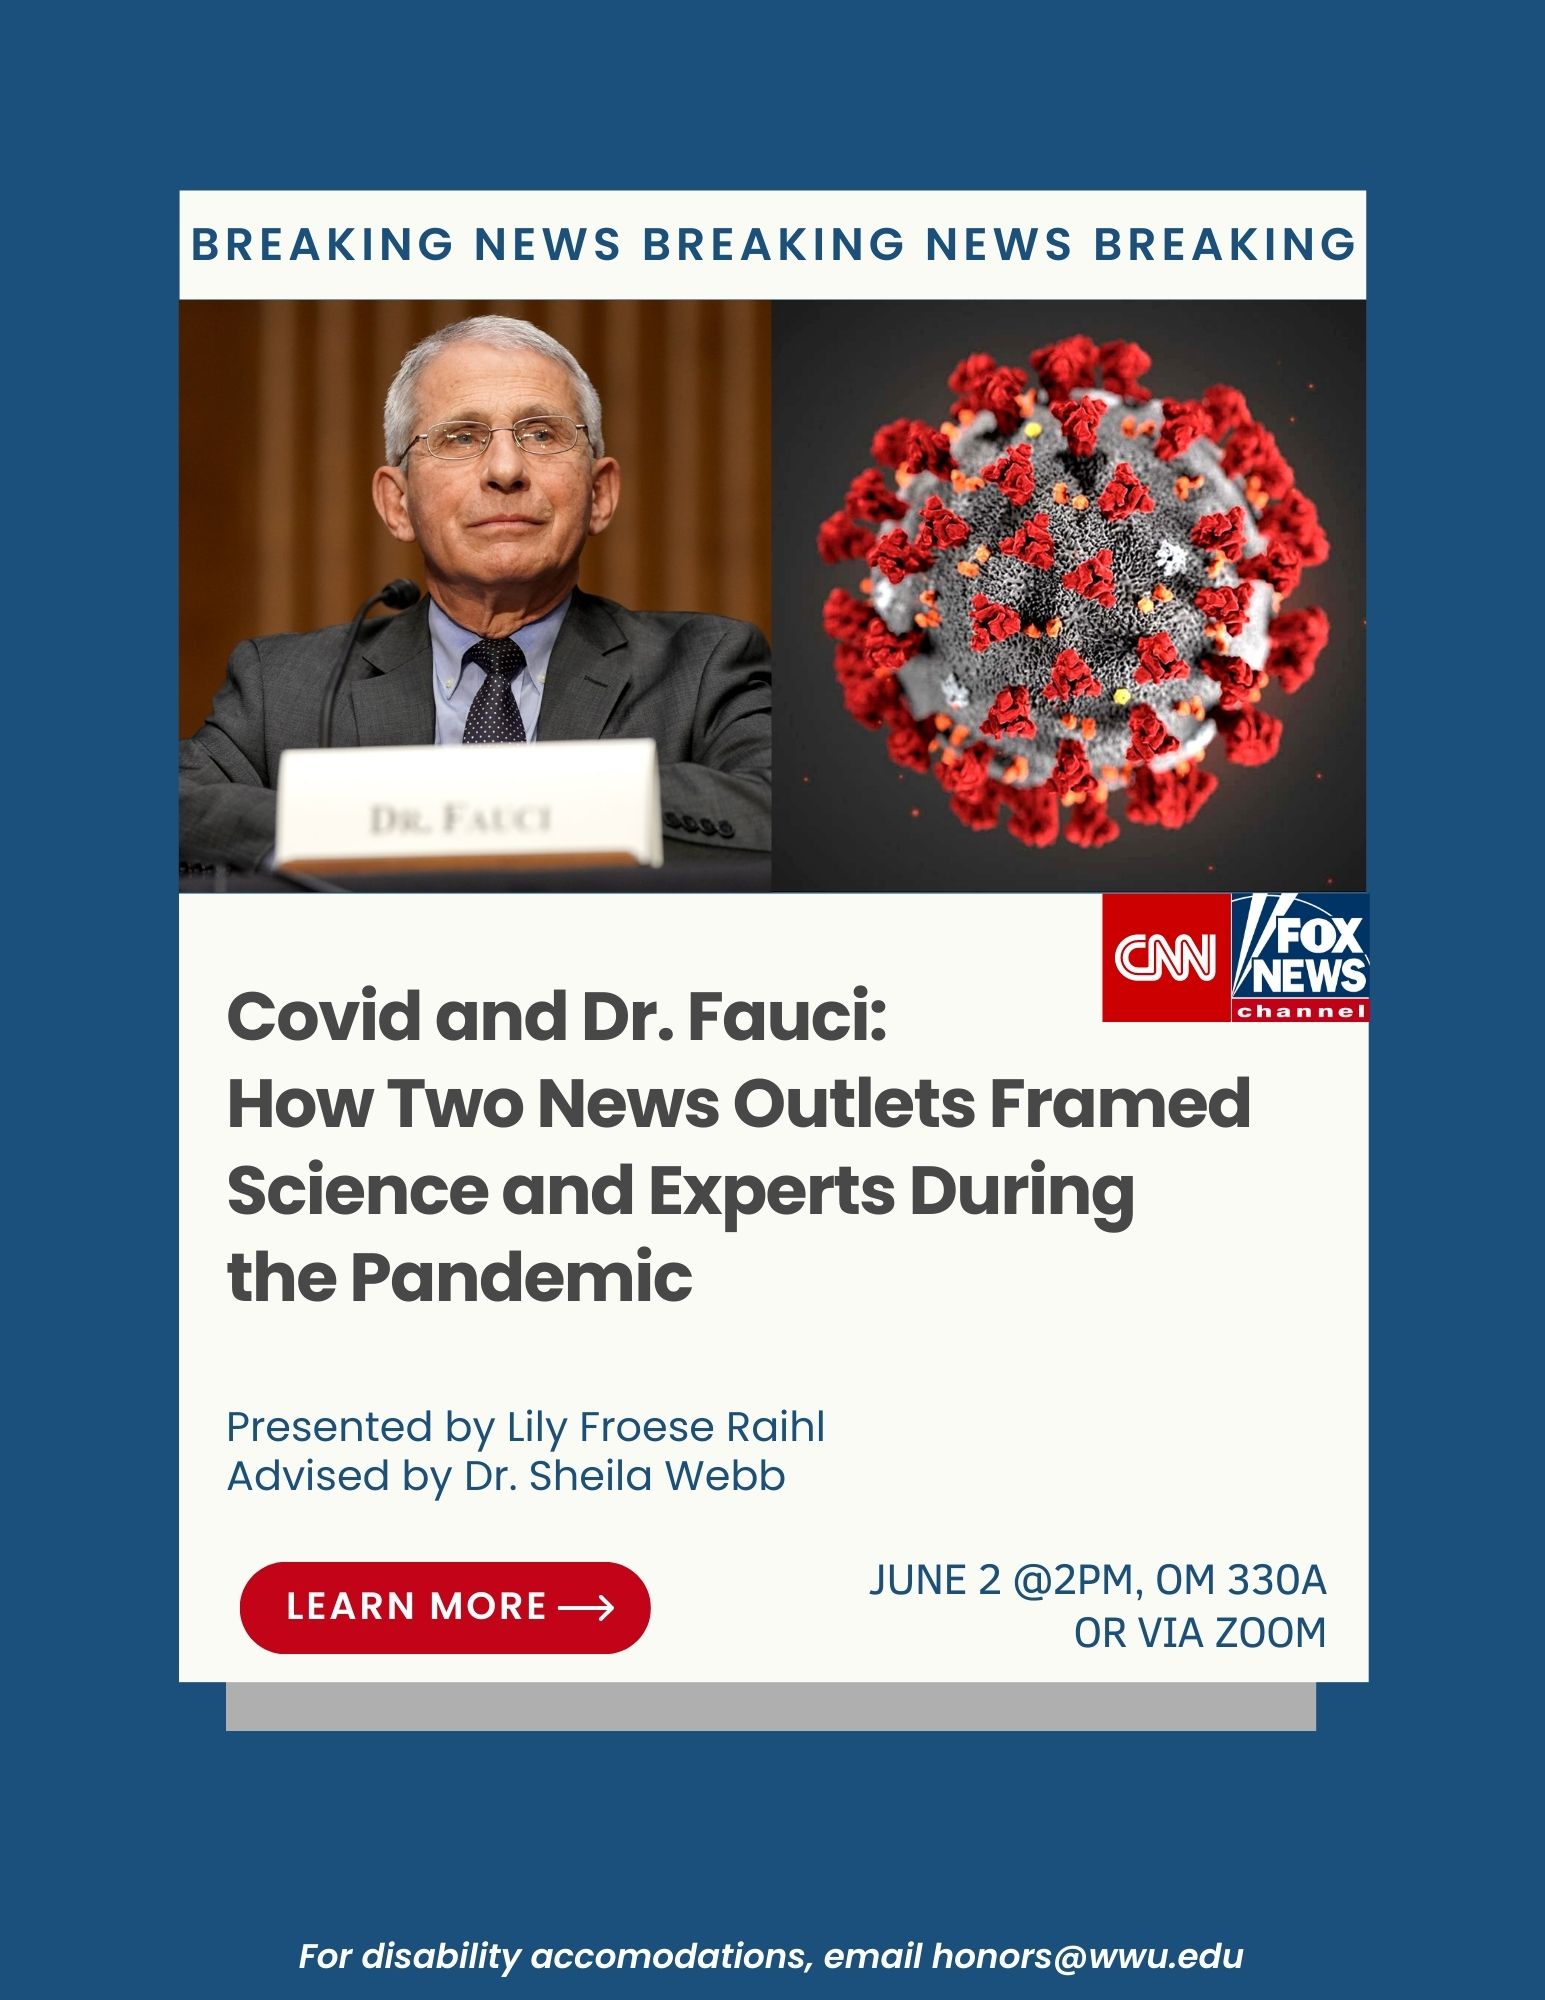 A poster with a dark blue background and a white social media pop up with the words "breaking news" running across the top, a photo of Dr. Fauci, a photo of the COVID-19 virus, and the Fox News and CNN logos. Text reads: "Covid and Dr. Fauci: How Two News Outlets Framed Science and Experts During the Pandemic. Presented by Lily Froese Raihl, Advised by Dr. Sheila Webb. June 2nd @2pm, OM 330A or via Zoom. For disability accommodations, email honors@wwu.edu."